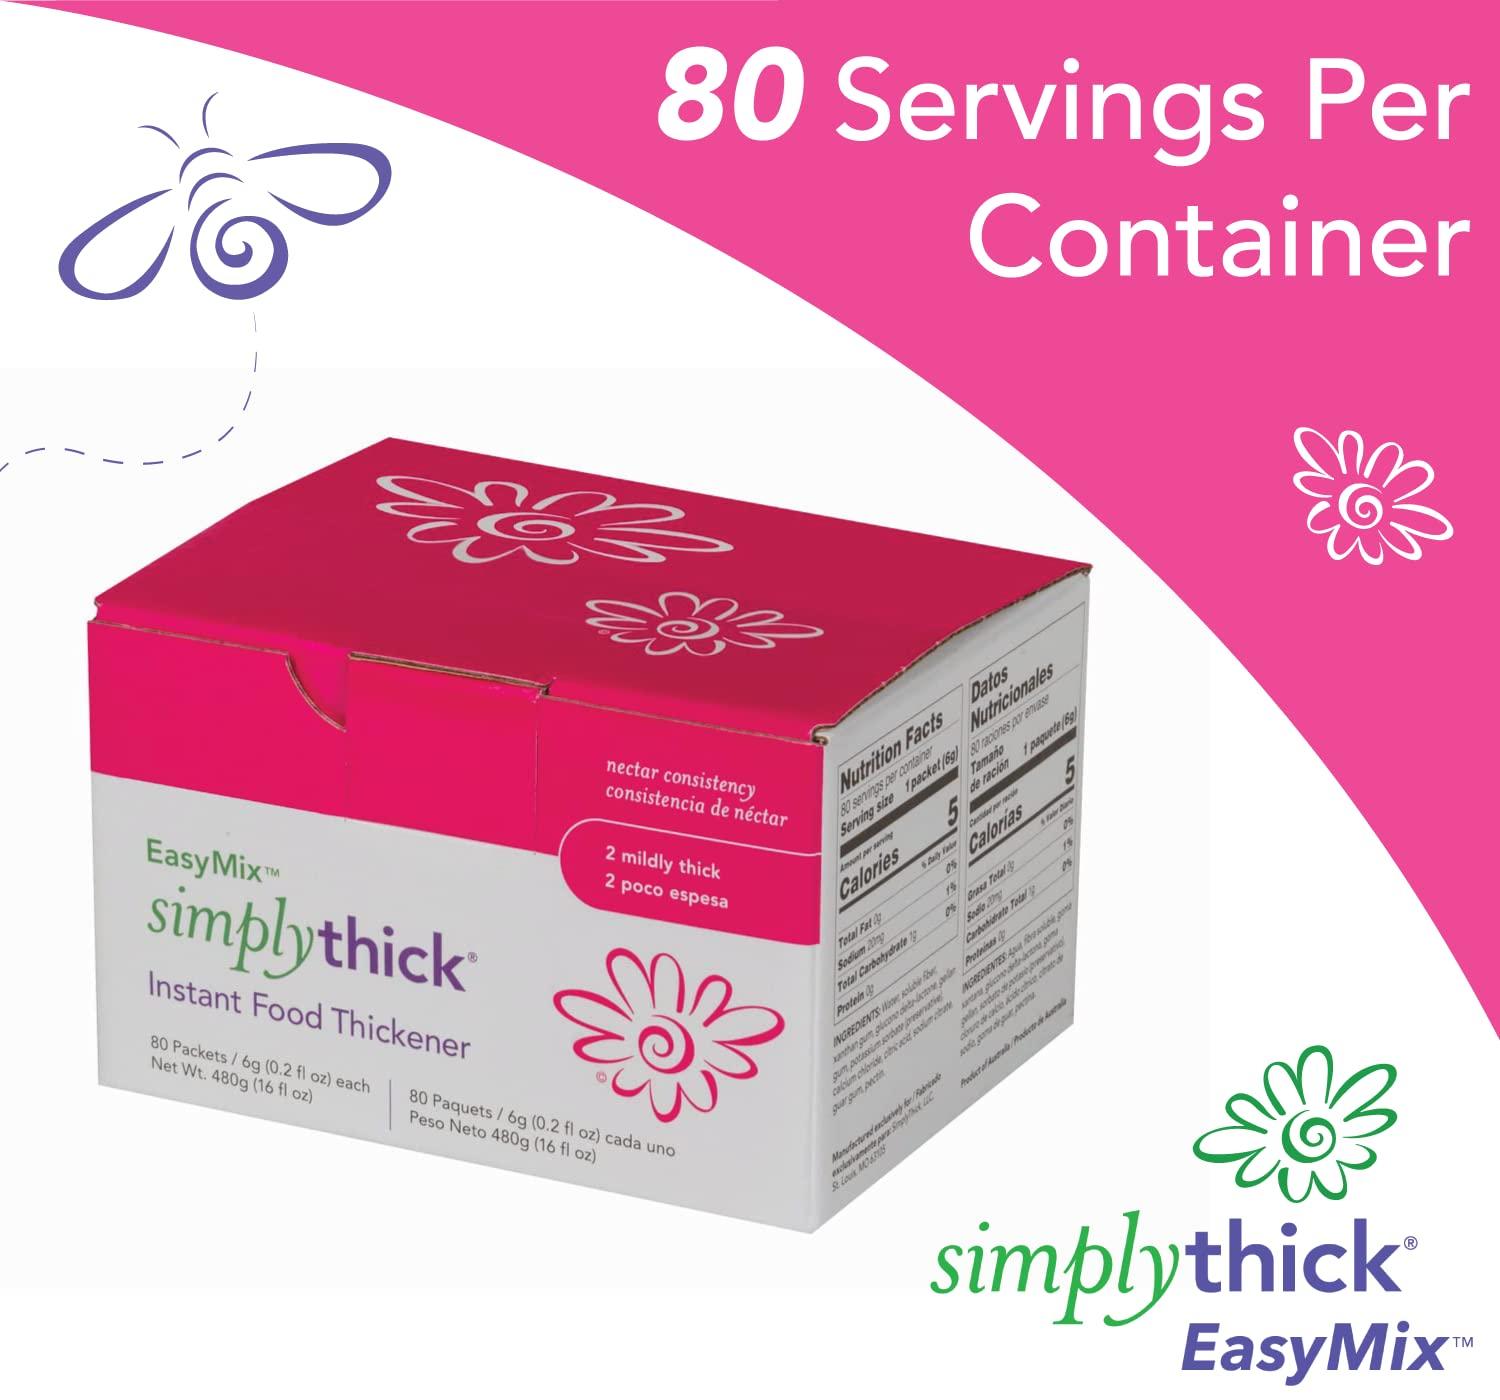 Why SimplyThick® gel?